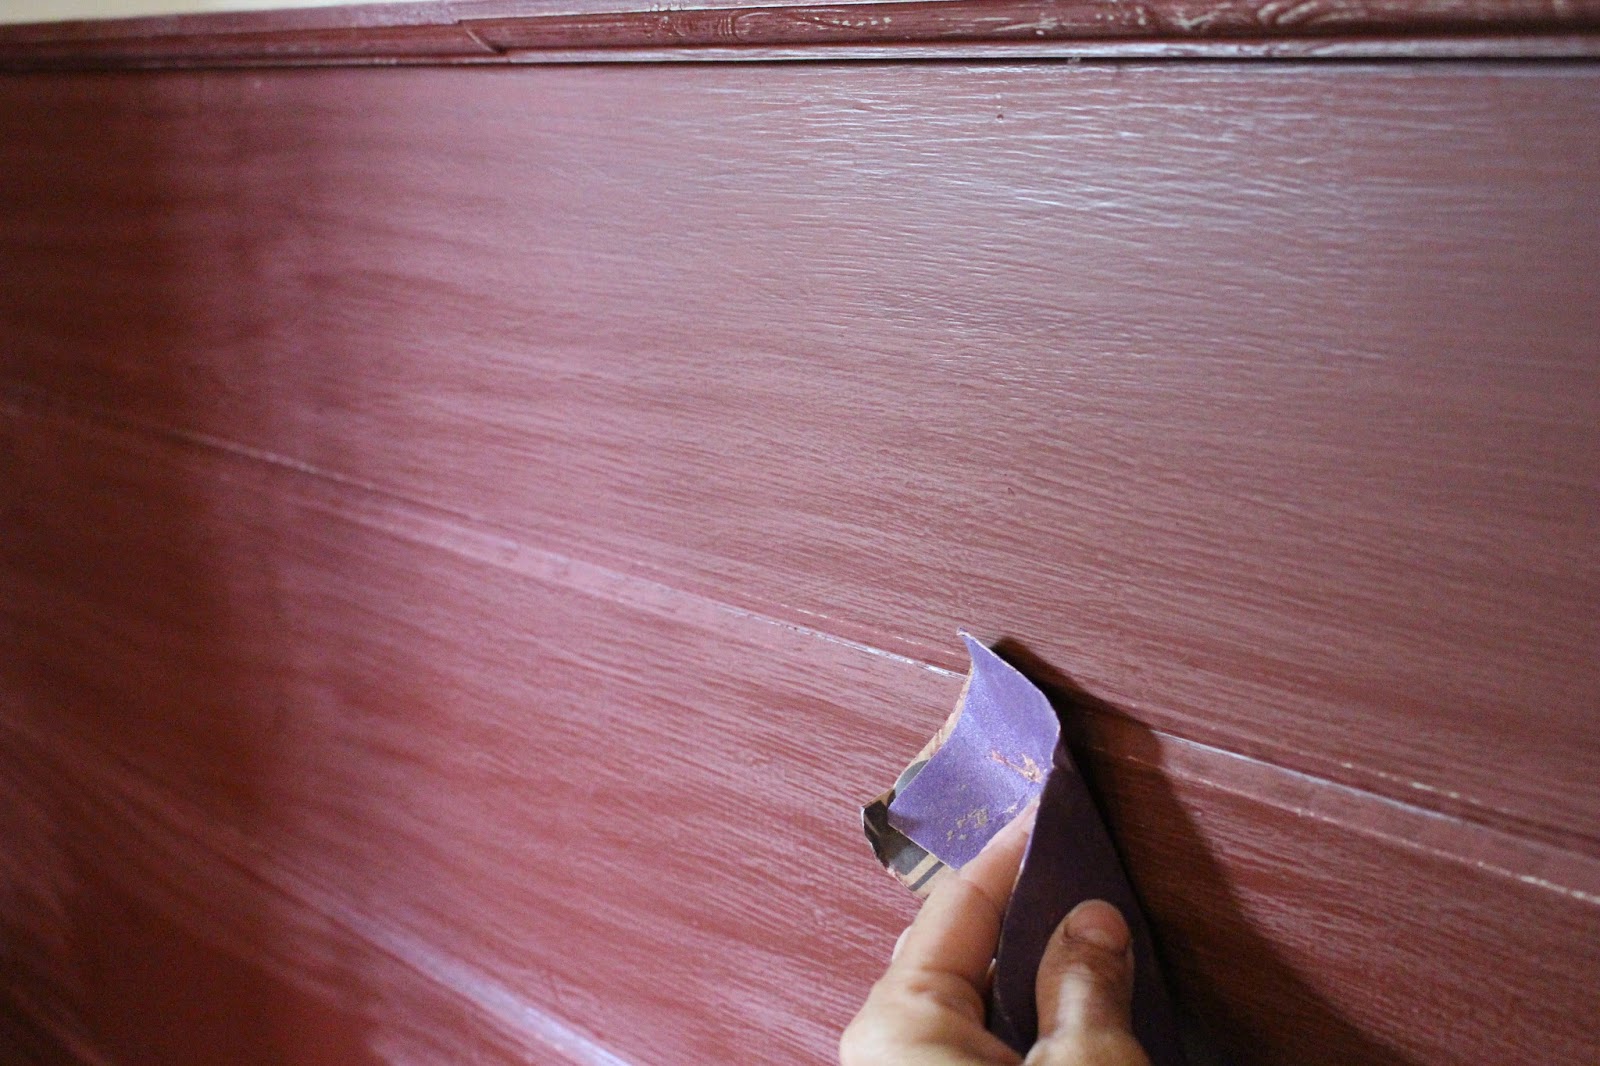 What Grit Sandpaper To Sand Semi Gloss Paint